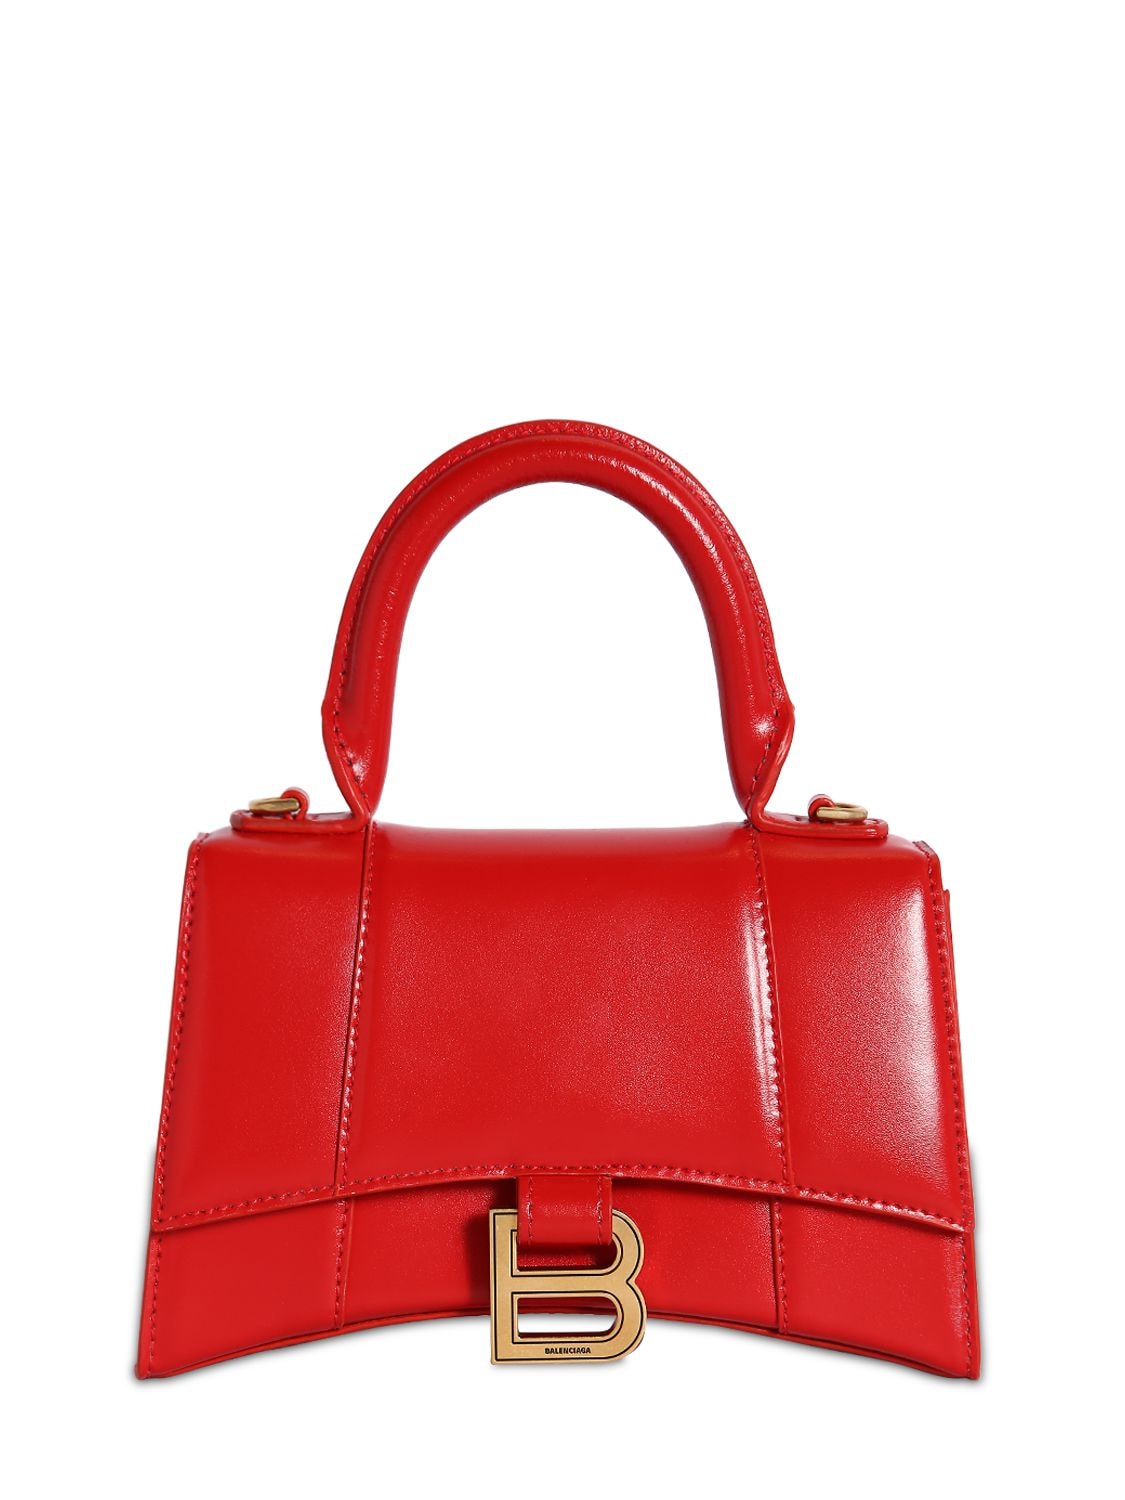 Balenciaga Xs Hourglass Smooth Leather Bag In Red | ModeSens